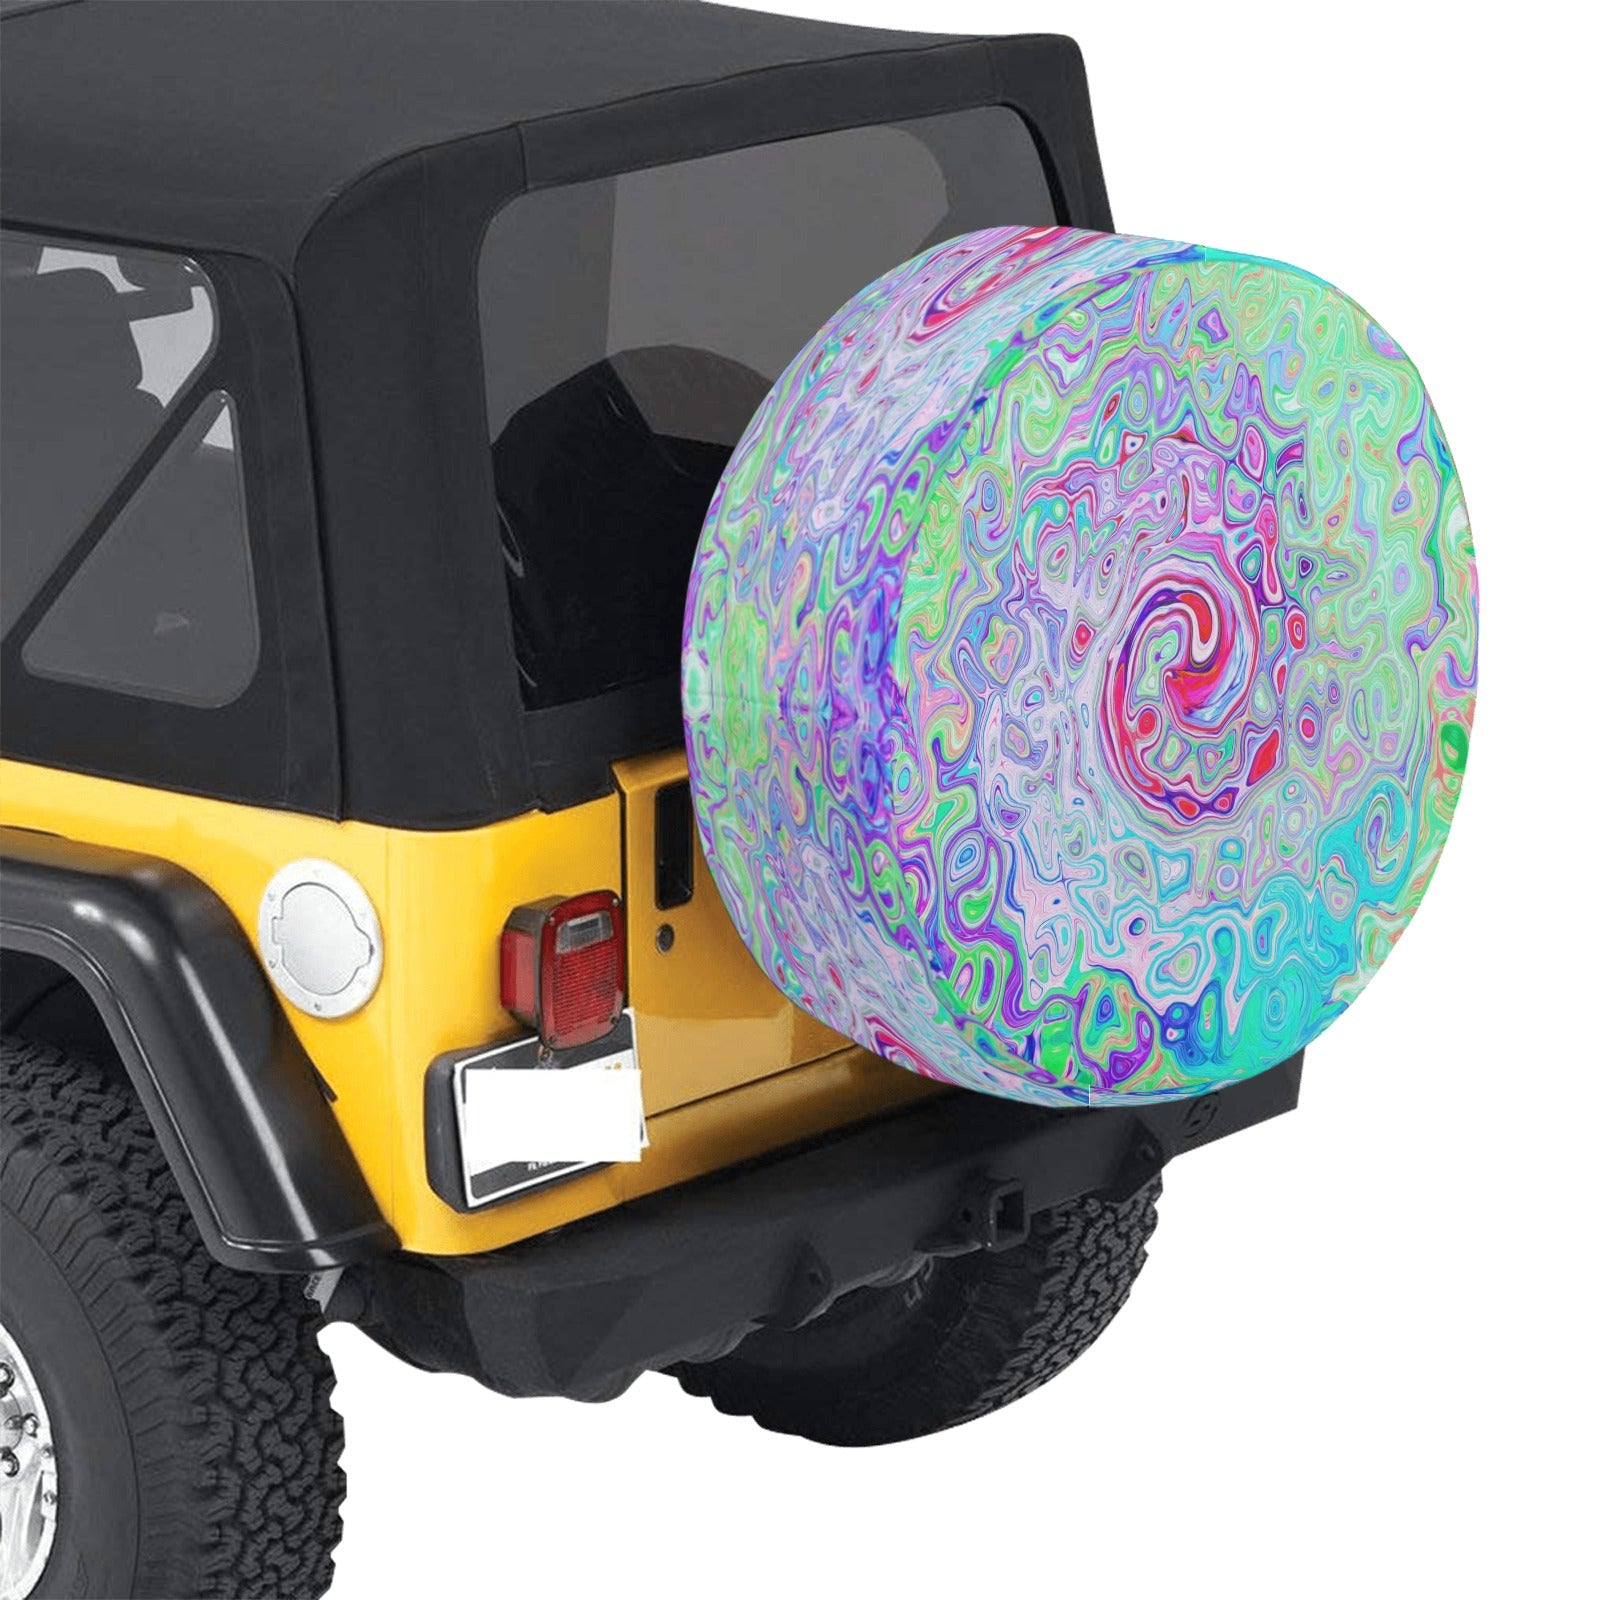 Spare Tire Covers, Groovy Abstract Retro Pink and Green Swirl - Large